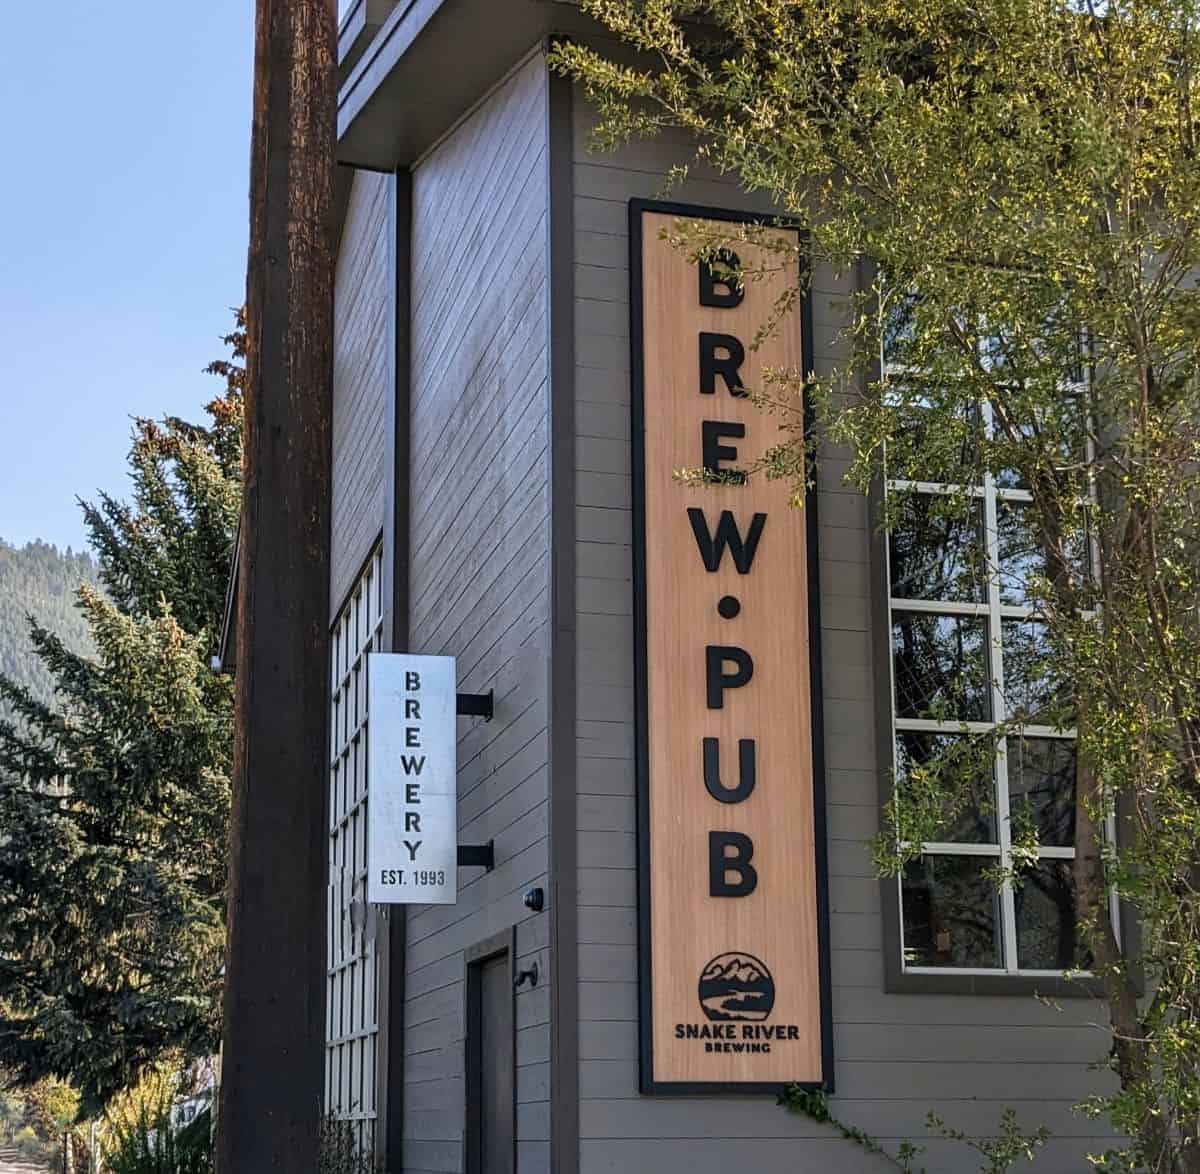 vertical sign on the side of a grey building. The sign says Brew Pub, Snake River Brewing.